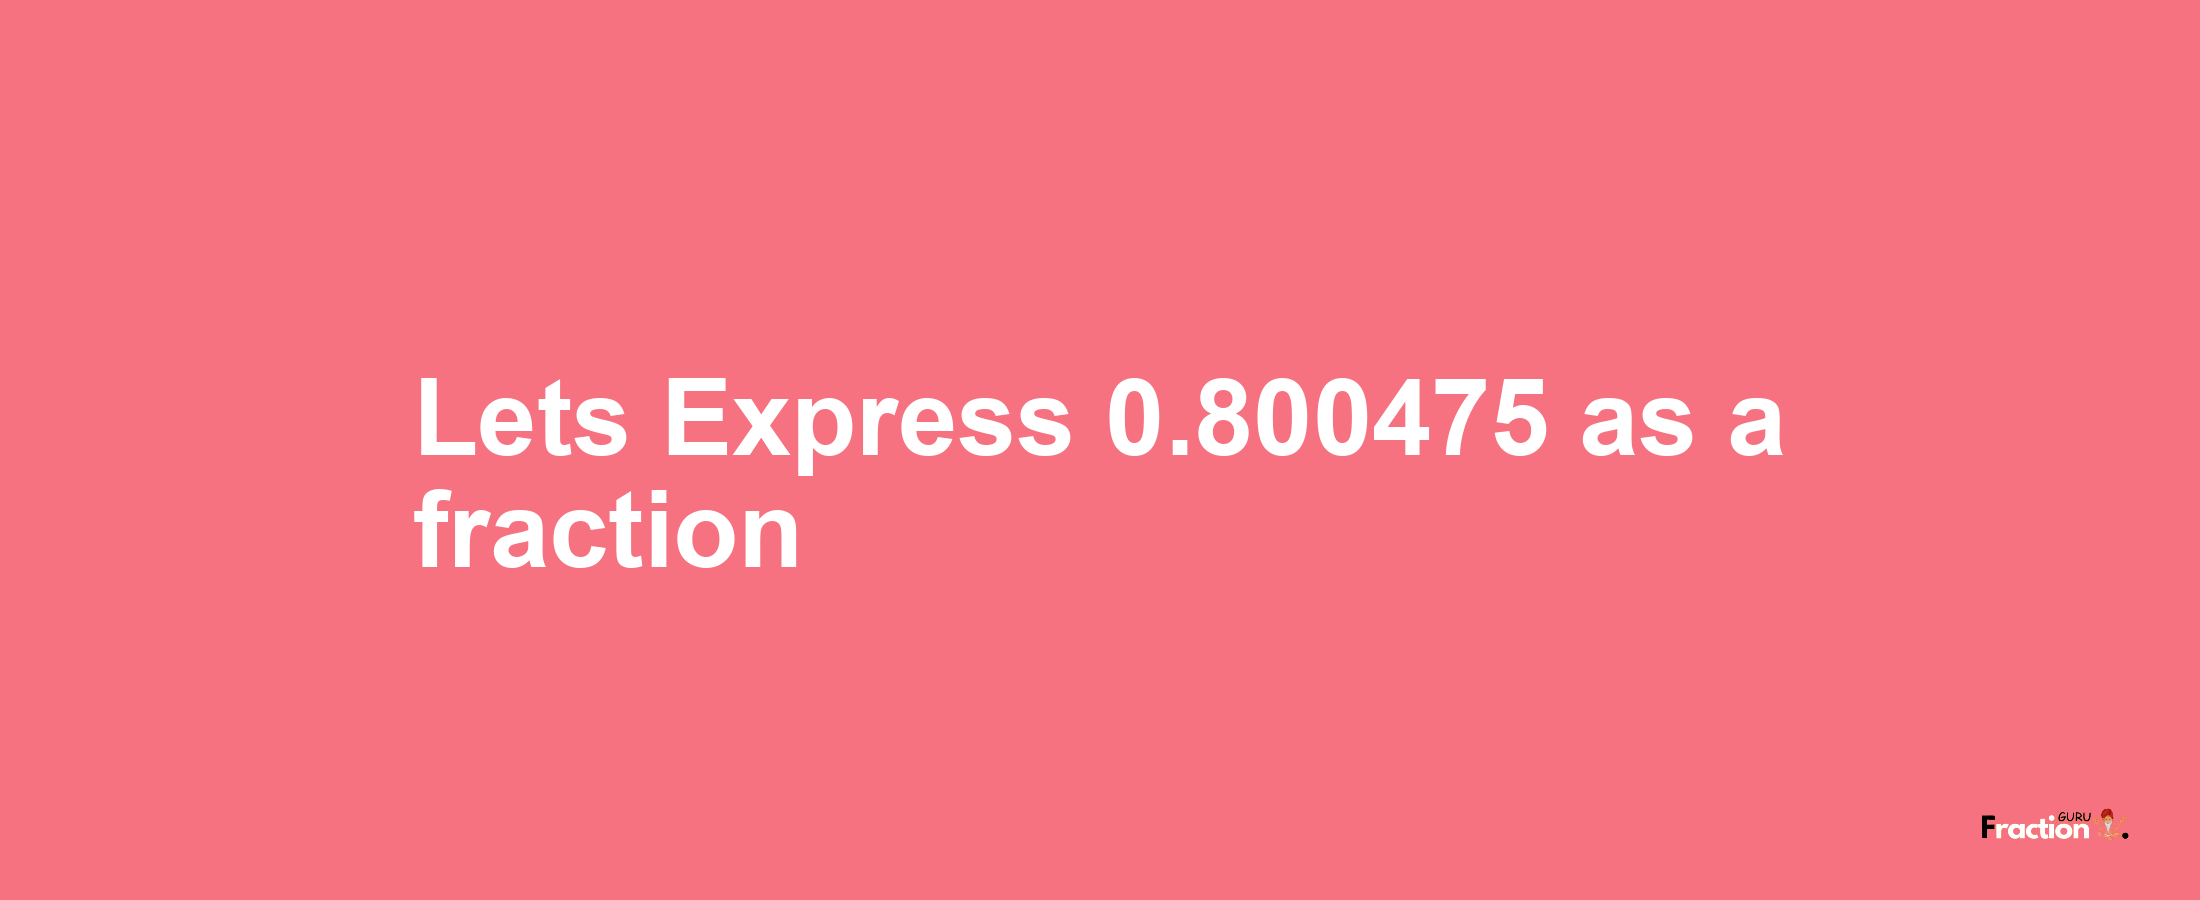 Lets Express 0.800475 as afraction